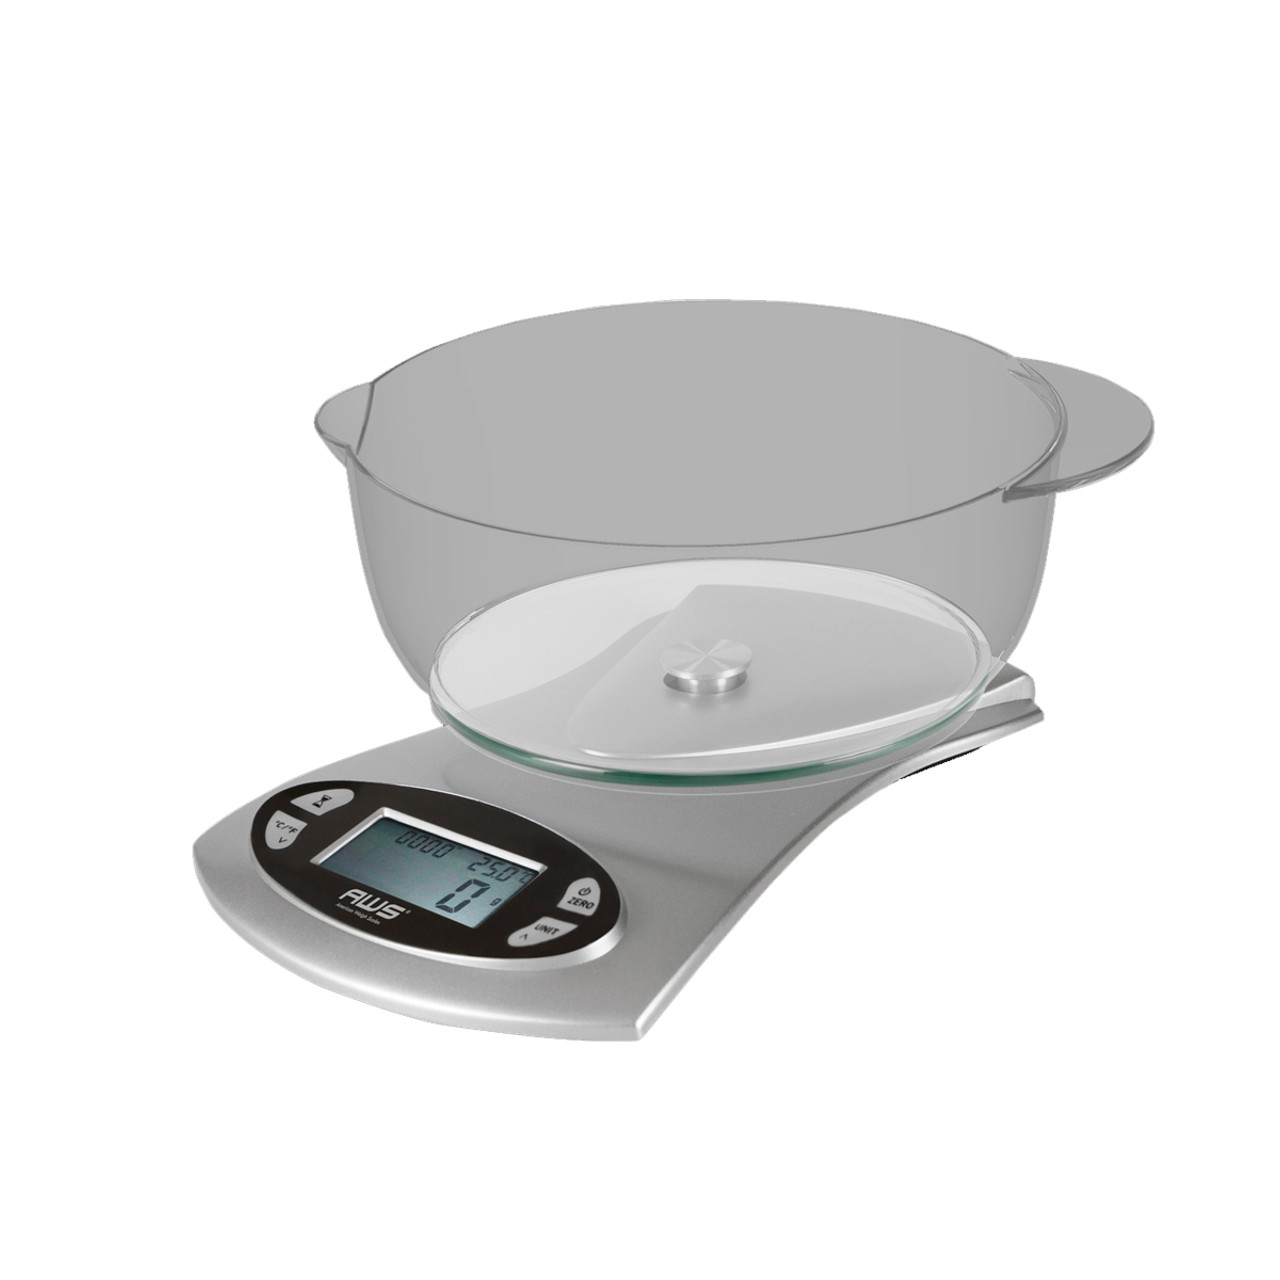 KITCHEN PRO-5KG DIGITAL BOWL SCALE, 5000KG X 0.1 - American Weigh Scales